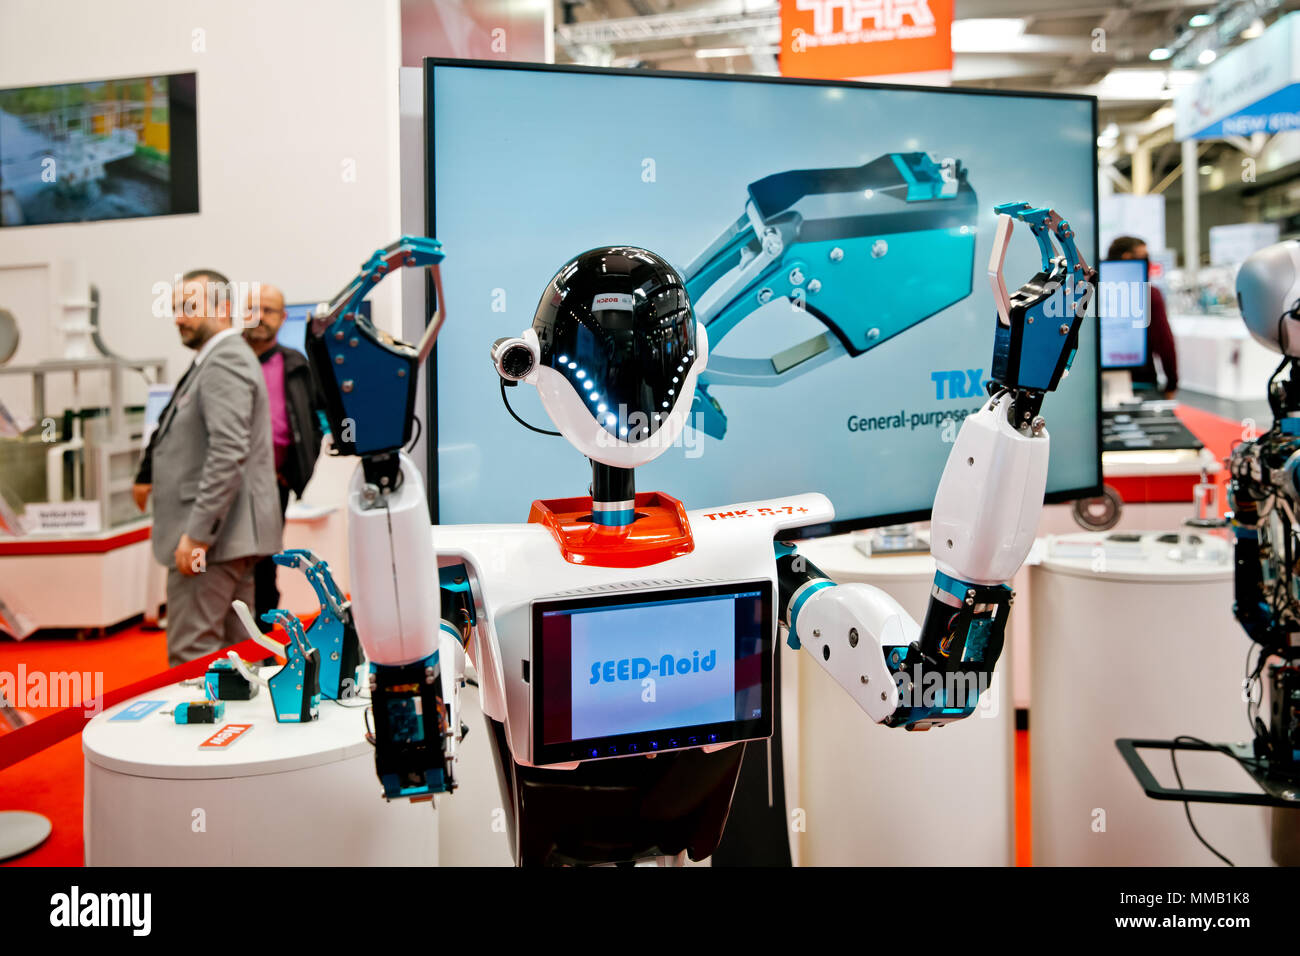 Hannover, Germany - April, 2018: Robot at the booth of THK on Messe fair in Hannover, Germany Stock Photo